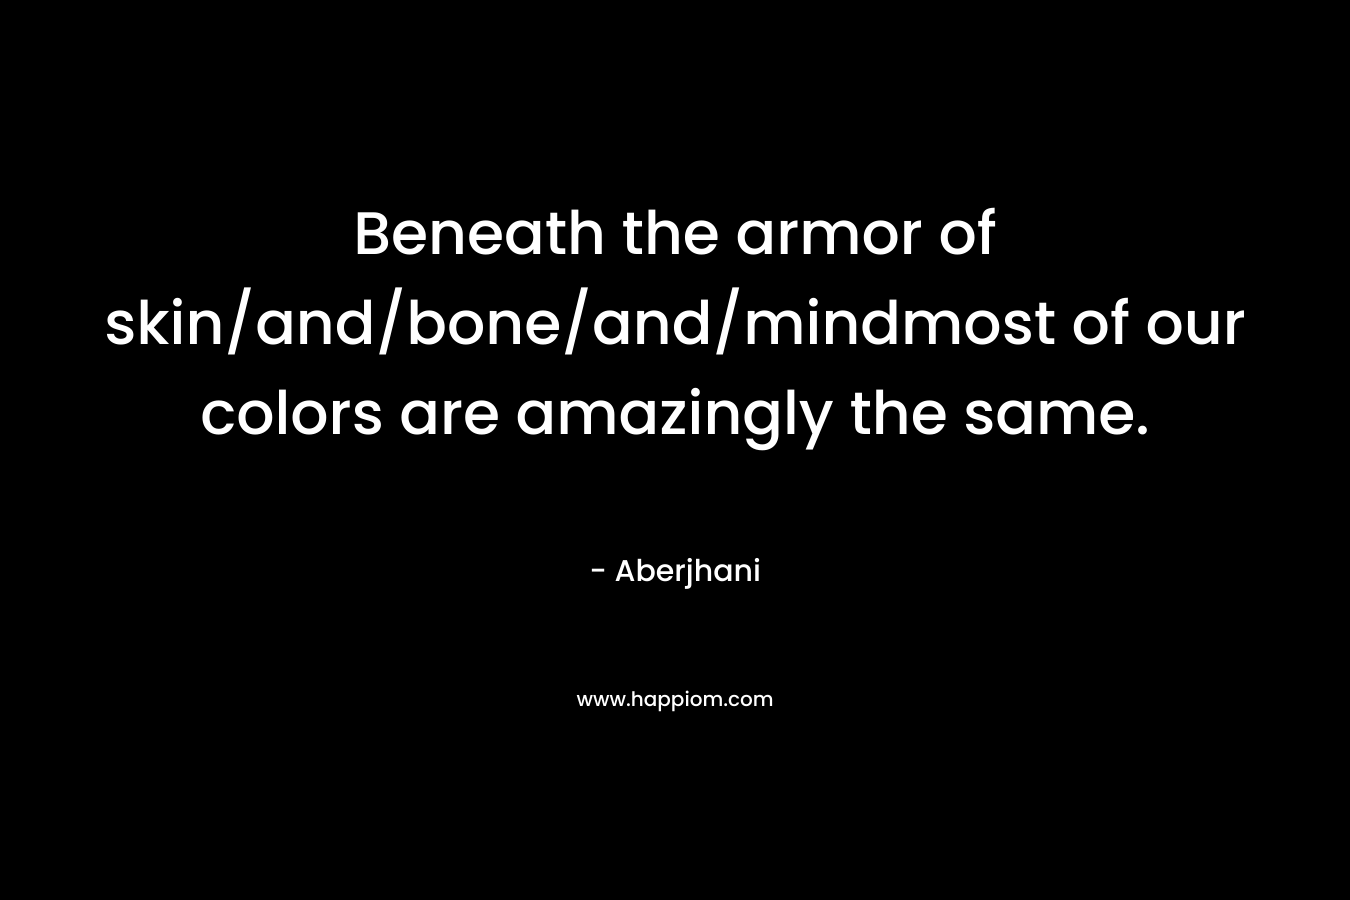 Beneath the armor of skin/and/bone/and/mindmost of our colors are amazingly the same. – Aberjhani